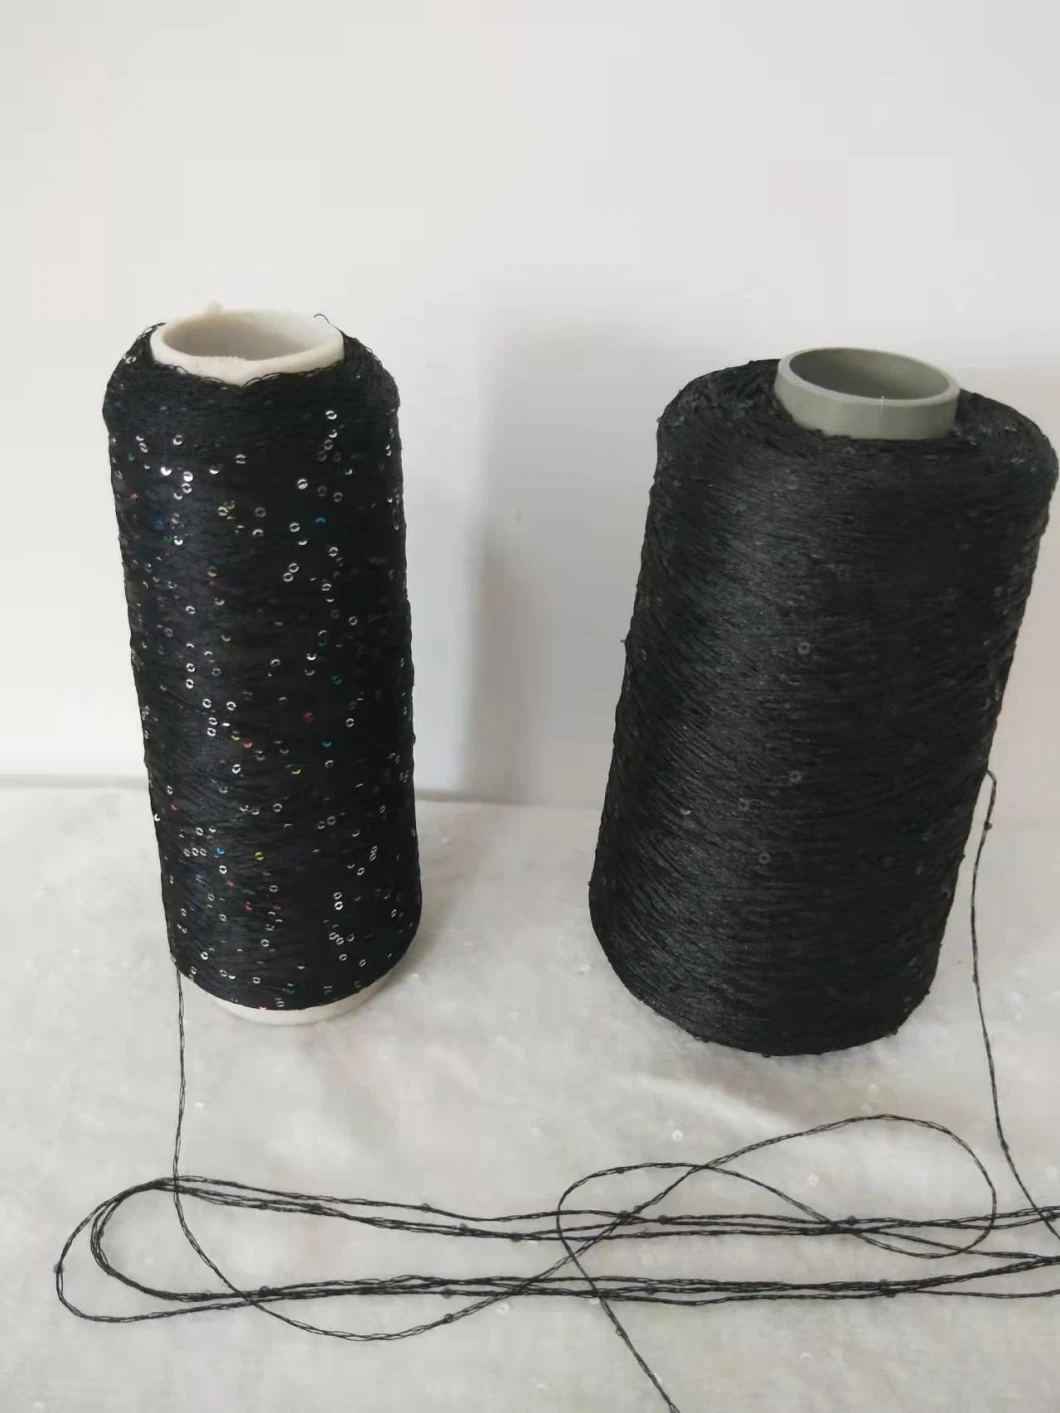 7.6/7.8nm Polyester/Nylon Sequin Yarn with 2mm Sequin